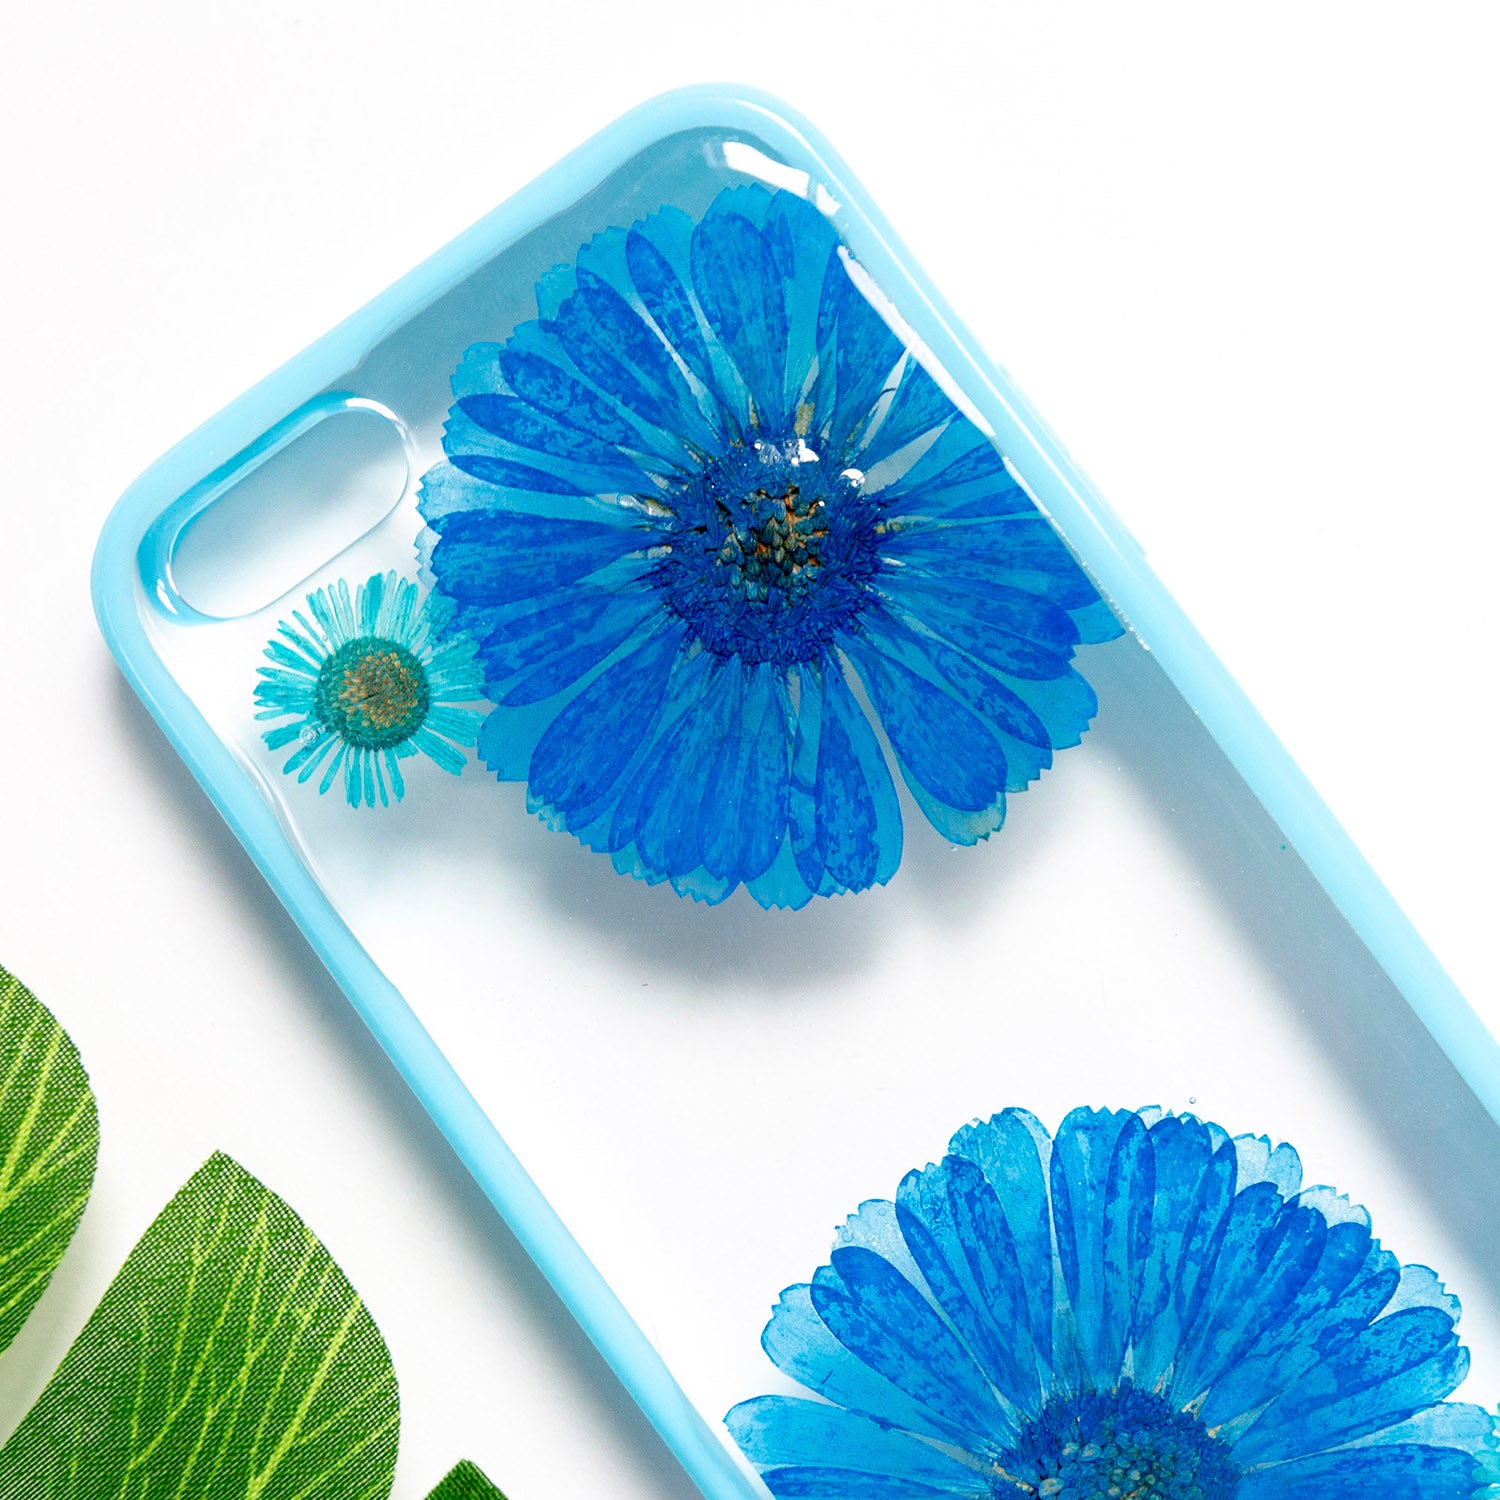 Floral Neverland Floralfy Blue Sapphire Real Pressed Blue Daisy Flower Floral Foliage Botanical iPhone 5 5s SE Bumper Case 02